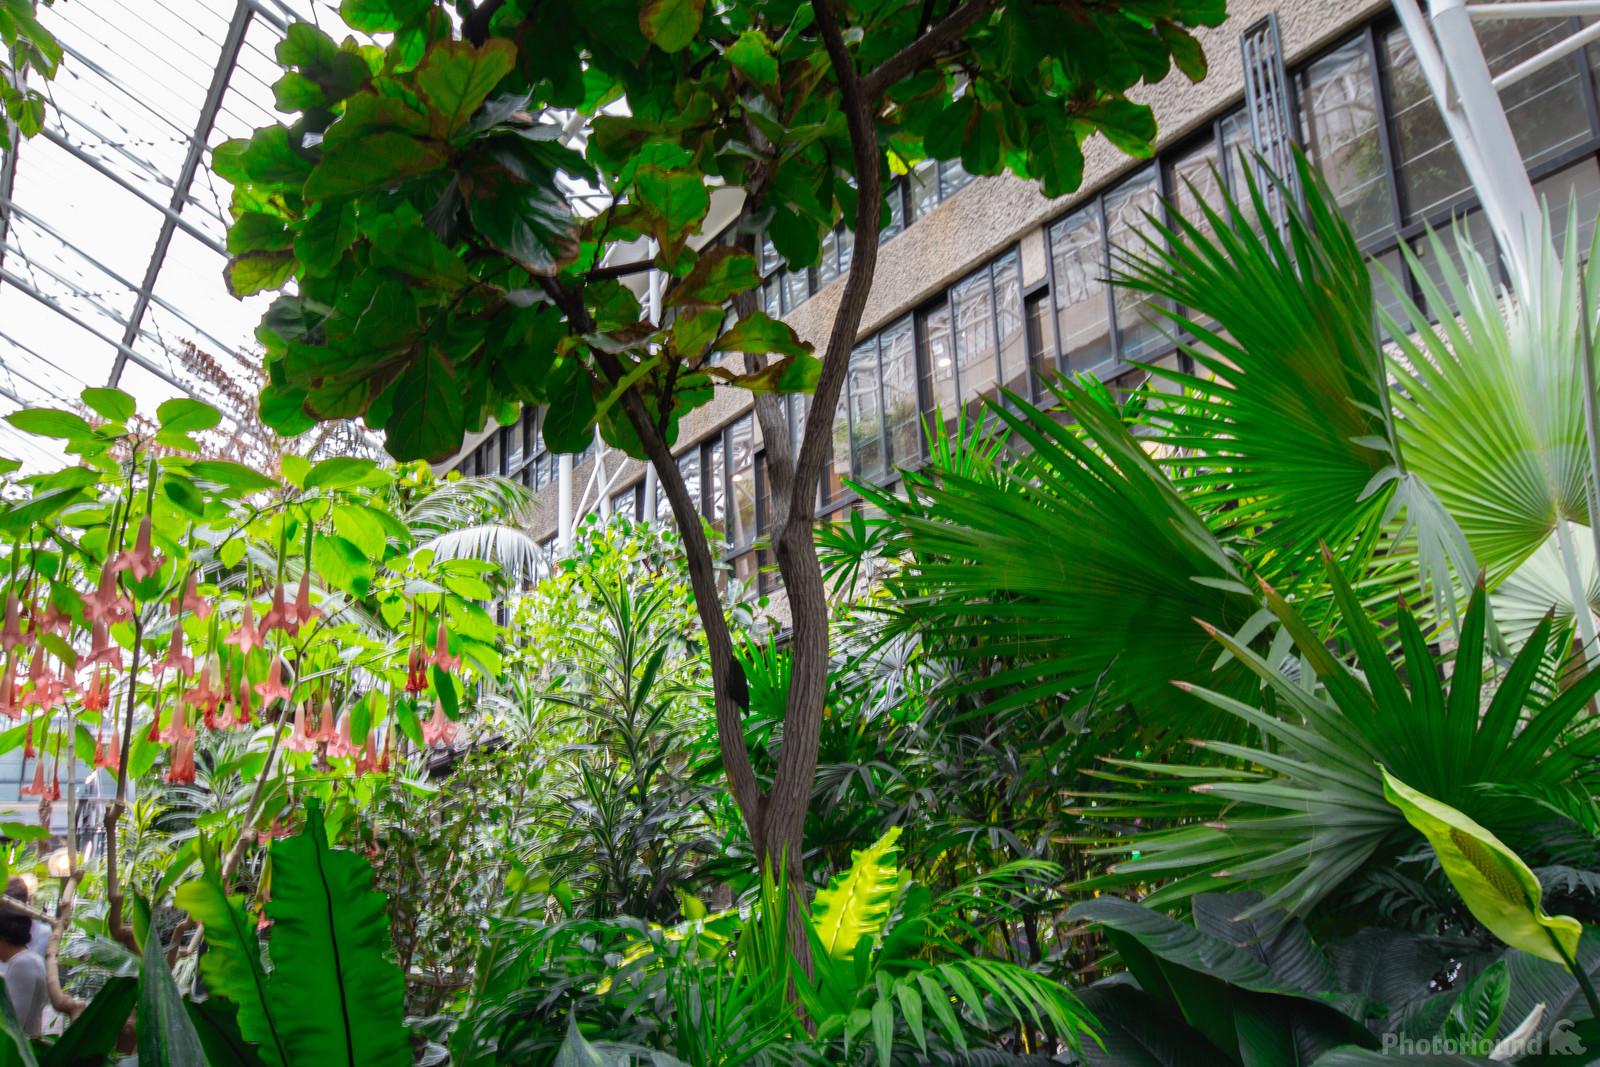 Image of Barbican Conservatory by Jules Renahan